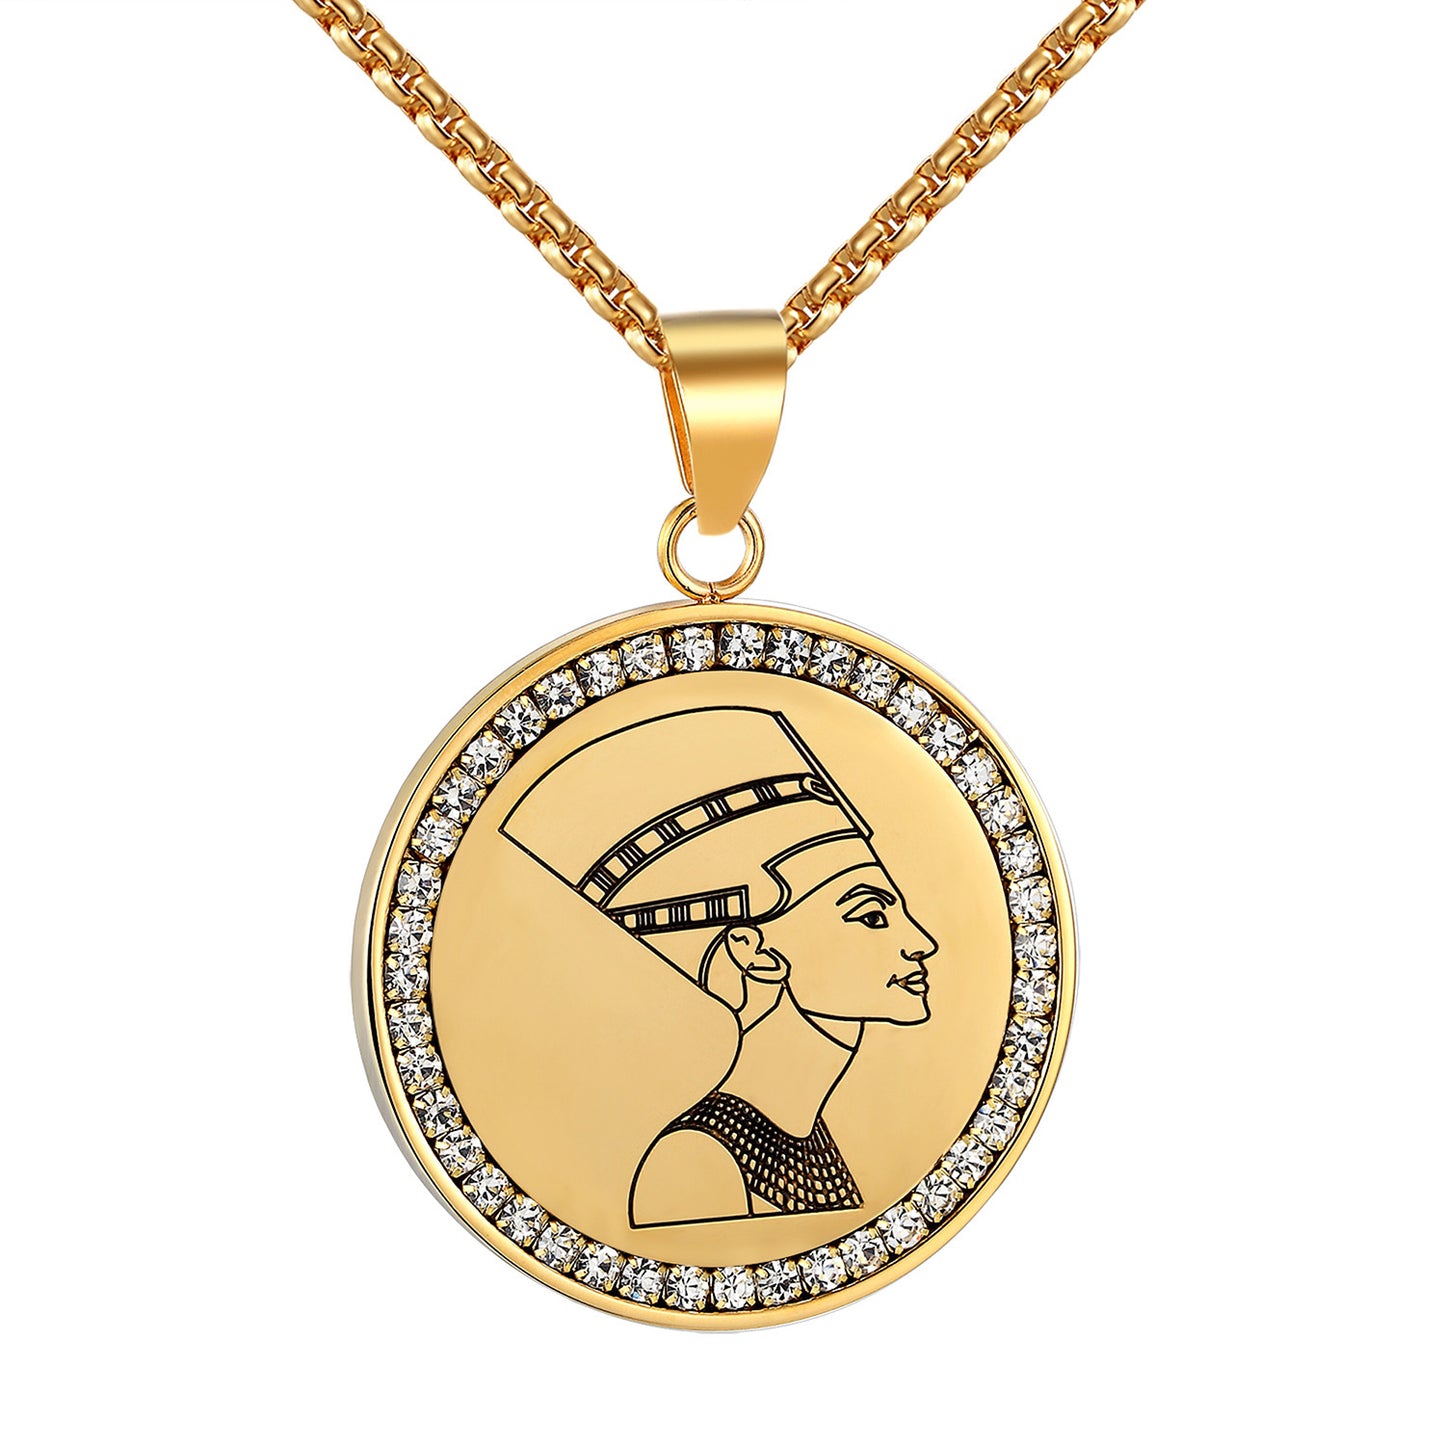 Queen Nefertiti Coin Design Pendant Necklace Simulated Diamond Stainless Steel